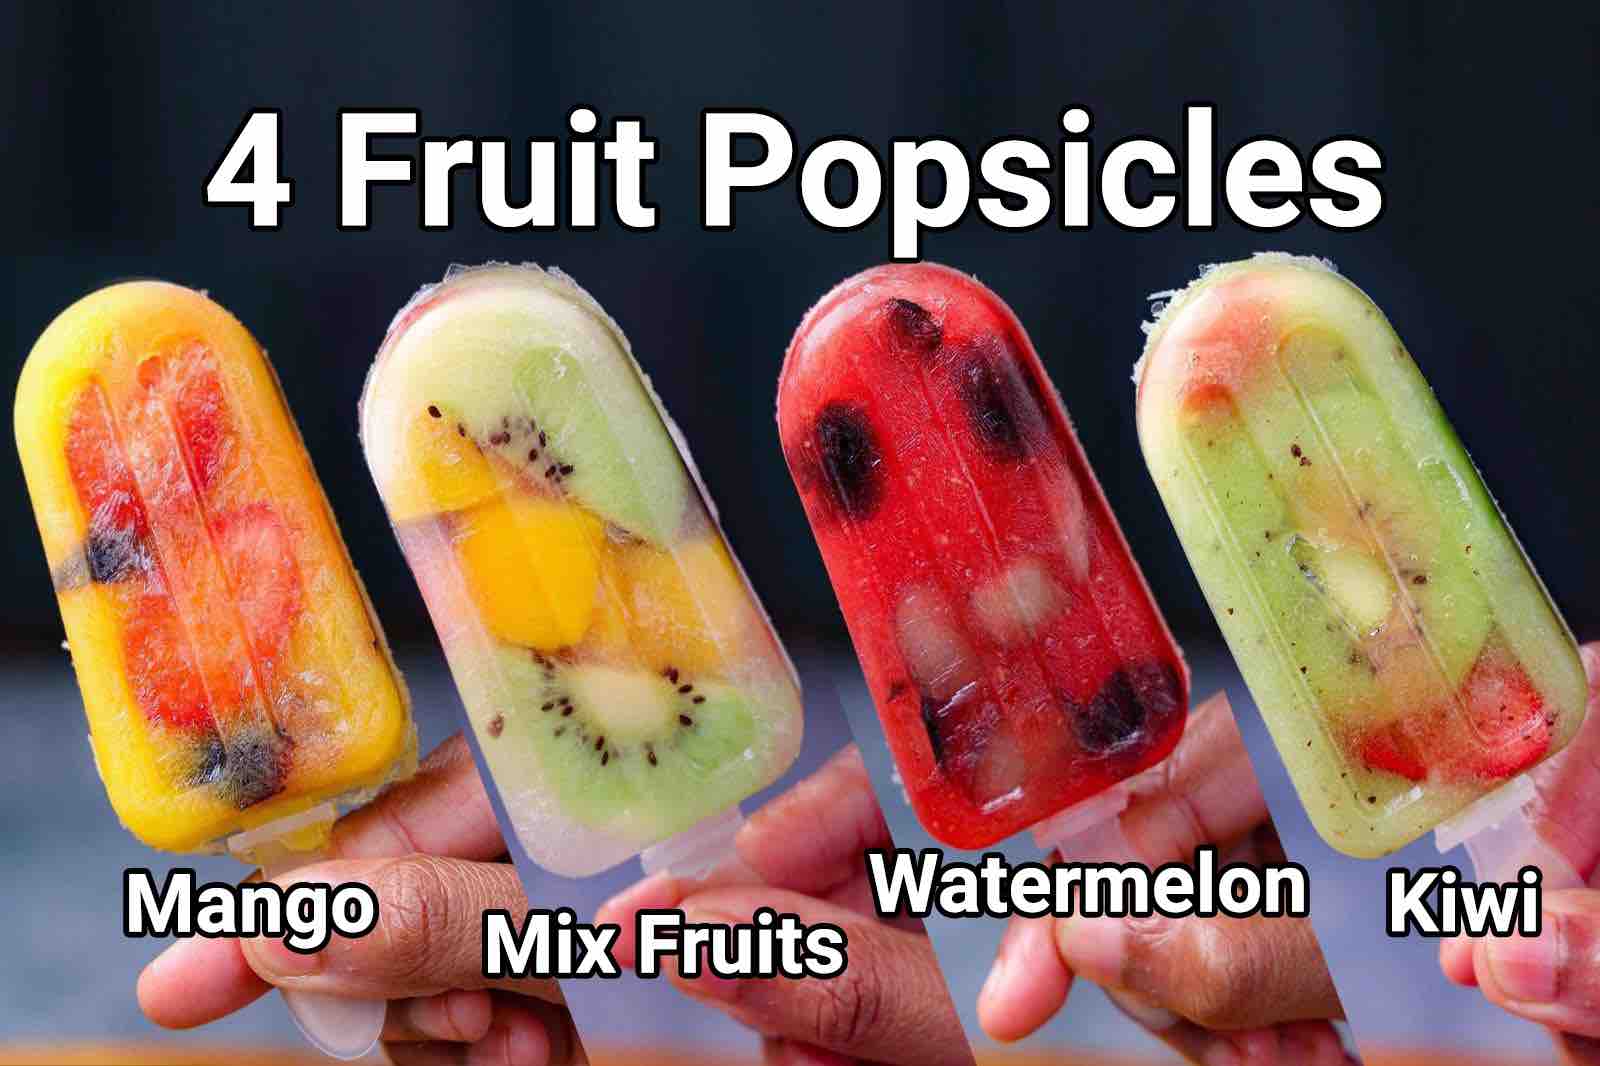 How to Make Homemade Popsicles